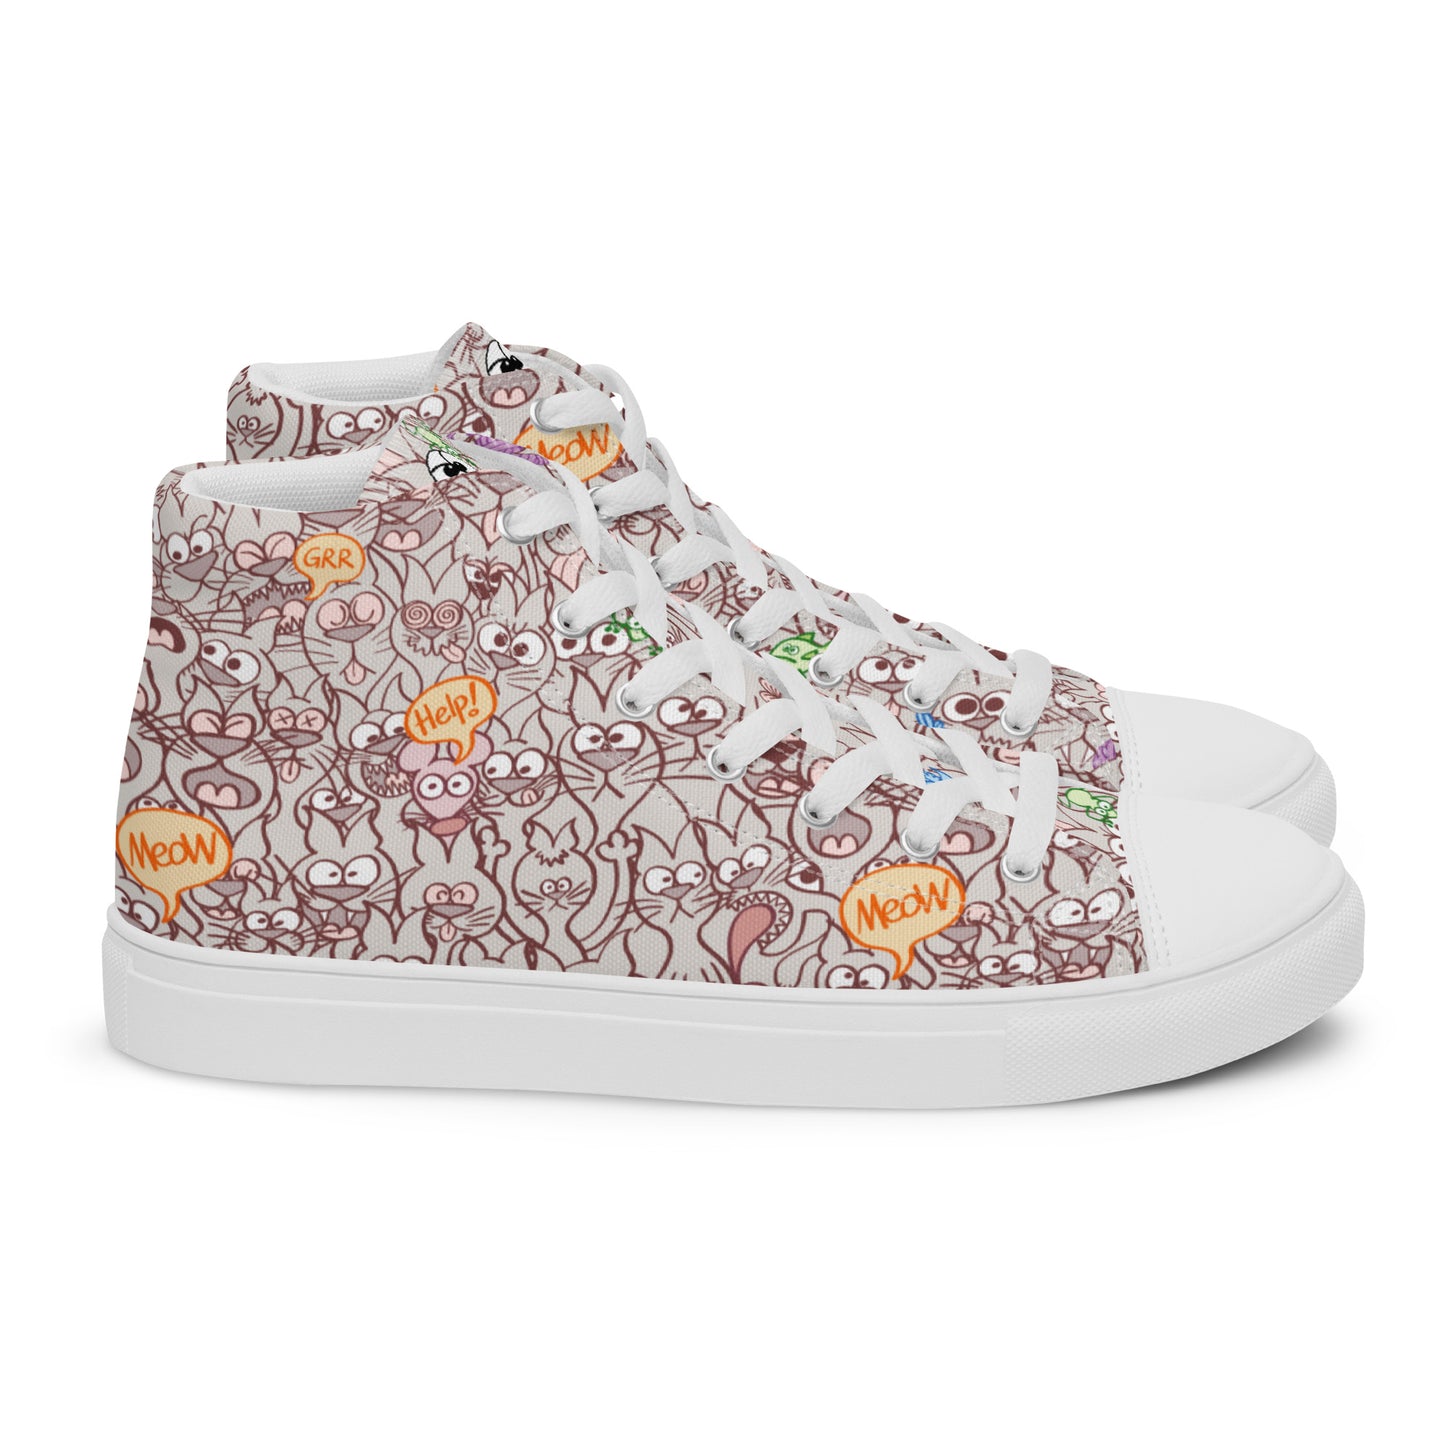 Exclusive design only for real cat lovers Women’s high top canvas shoes. Side view